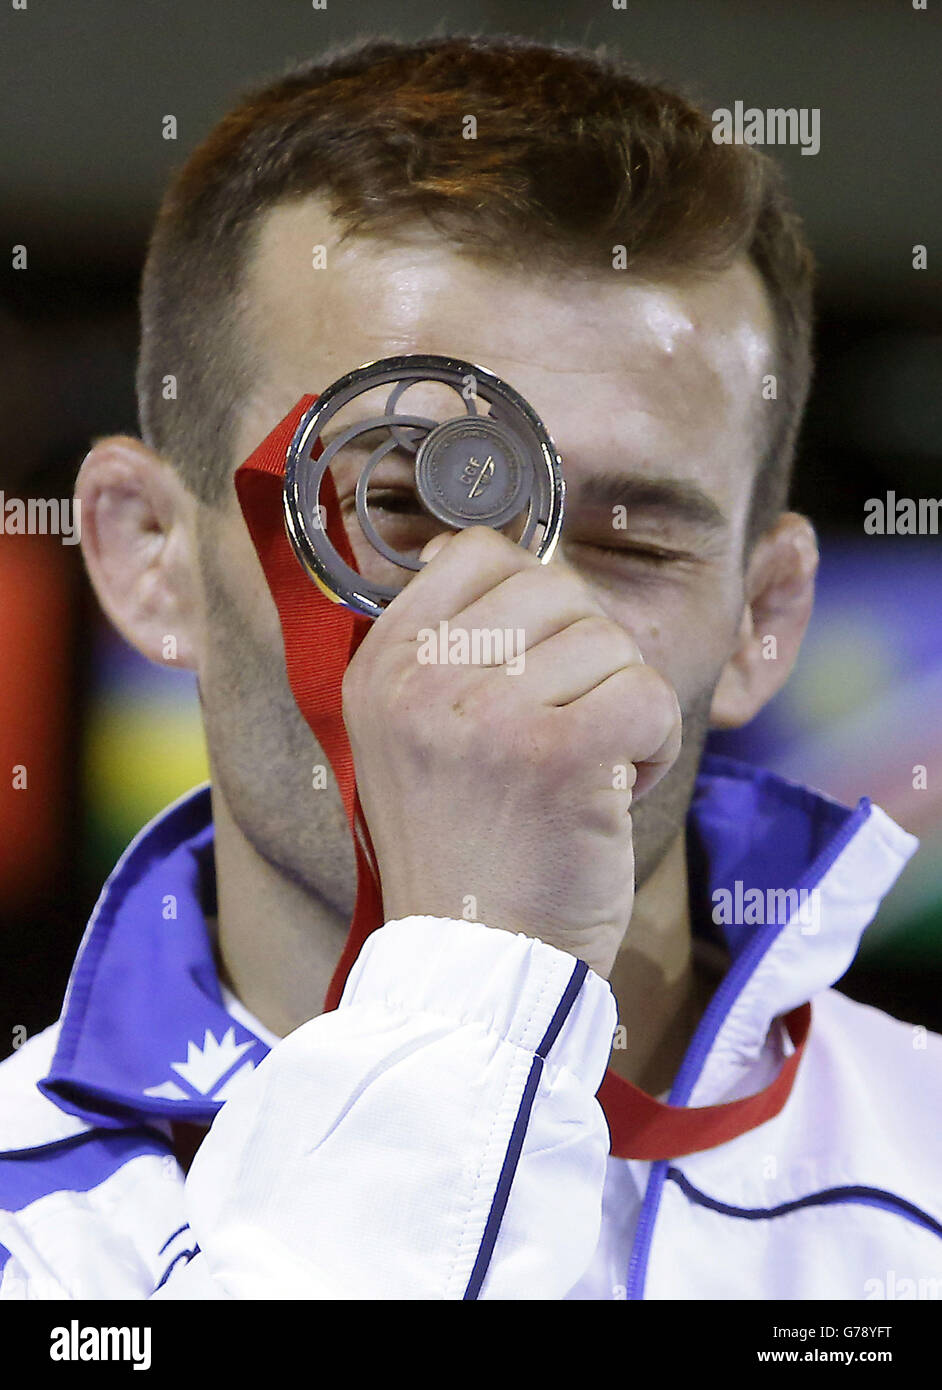 Scotland's Viorel Etko with his bronze medal from the FS 61 kg wrestling at the SECC, during the 2014 Commonwealth Games in Glasgow at the SECC, during the 2014 Commonwealth Games in Glasgow. Stock Photo